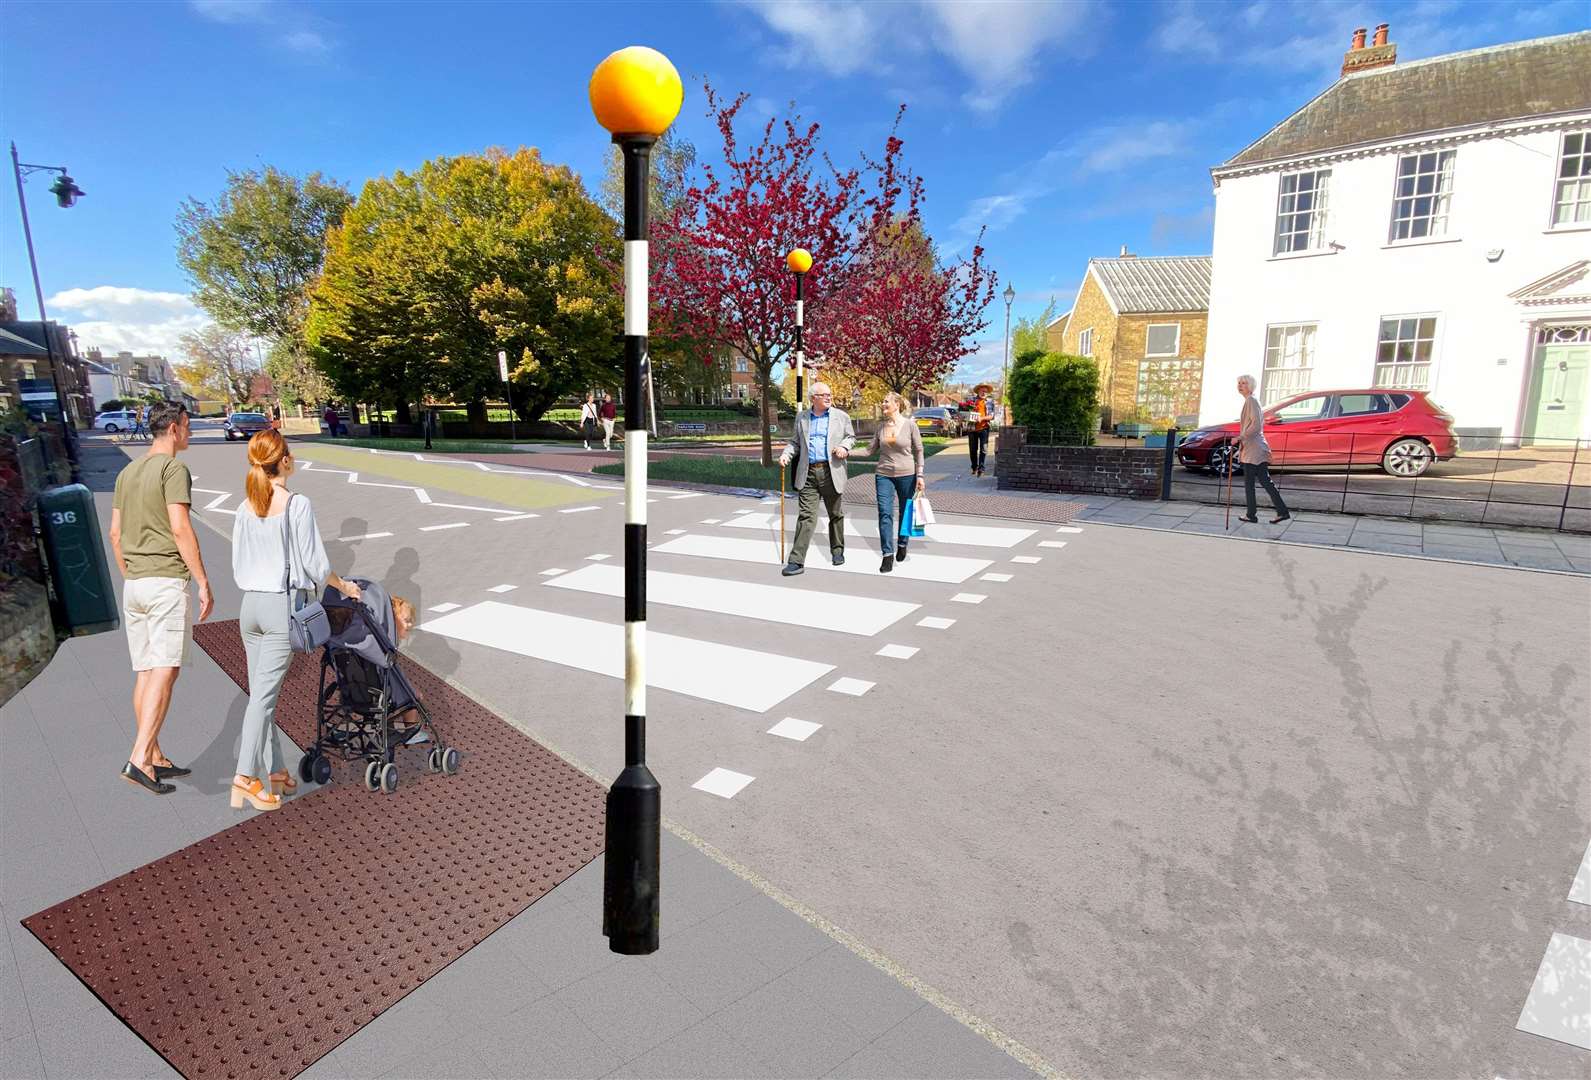 Details will go on display for the scheme in Faversham for the first time this week, with an exhibition planned. Picture: Faversham Town Council/Space Syntax